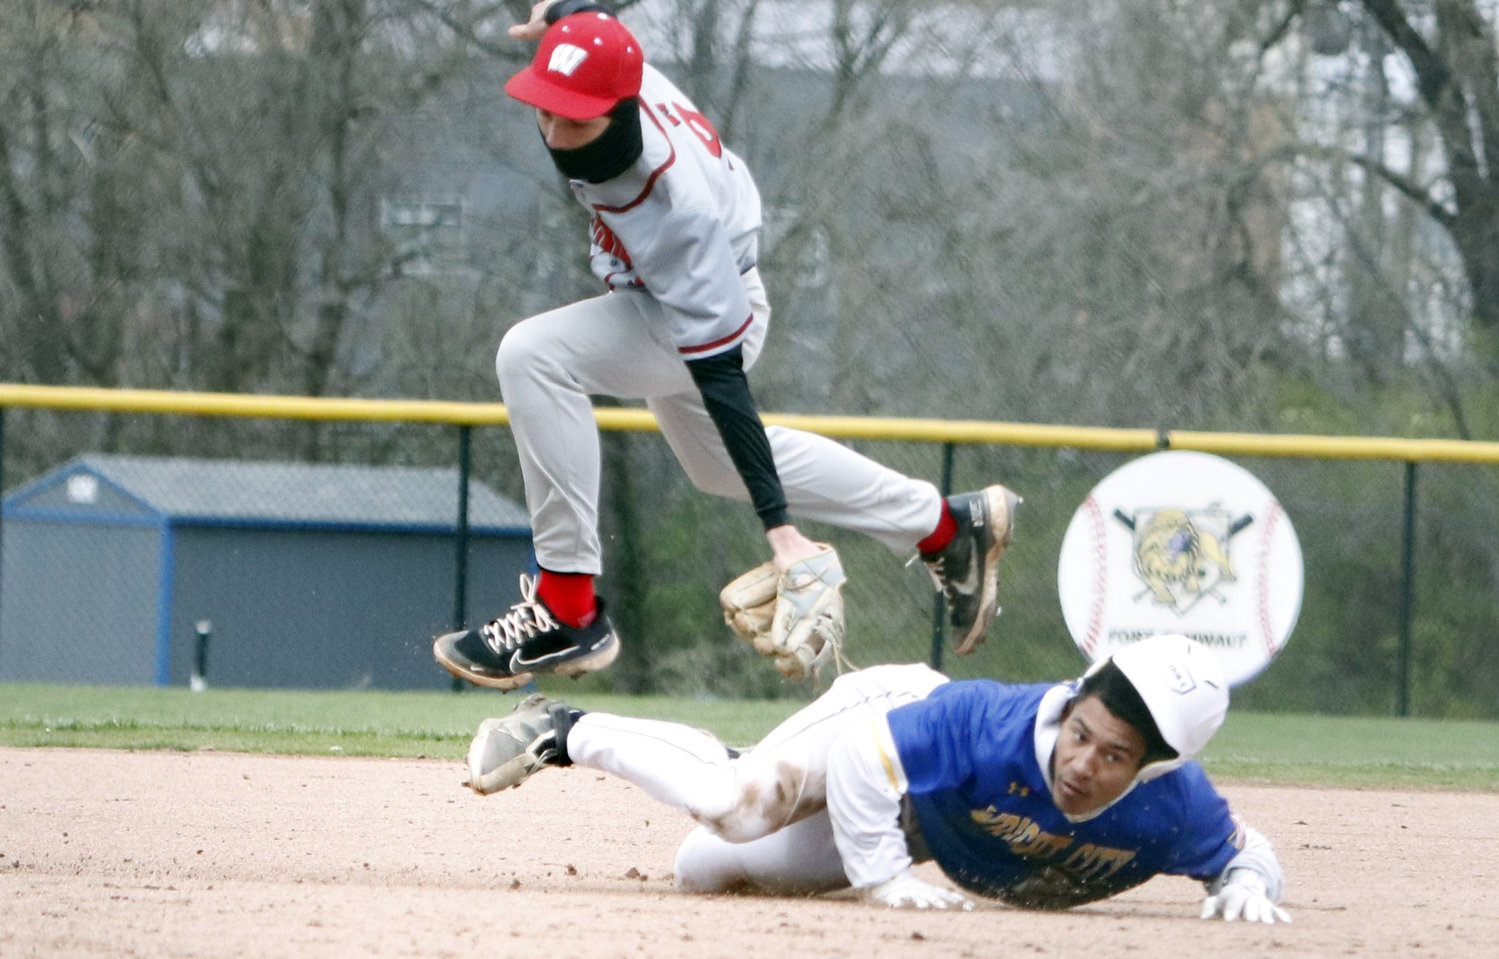 Warrenton shortstop Colin Disilvister (top) jumps over Duan McRoberts after tagging out McRoberts at second base during last weekend's game.